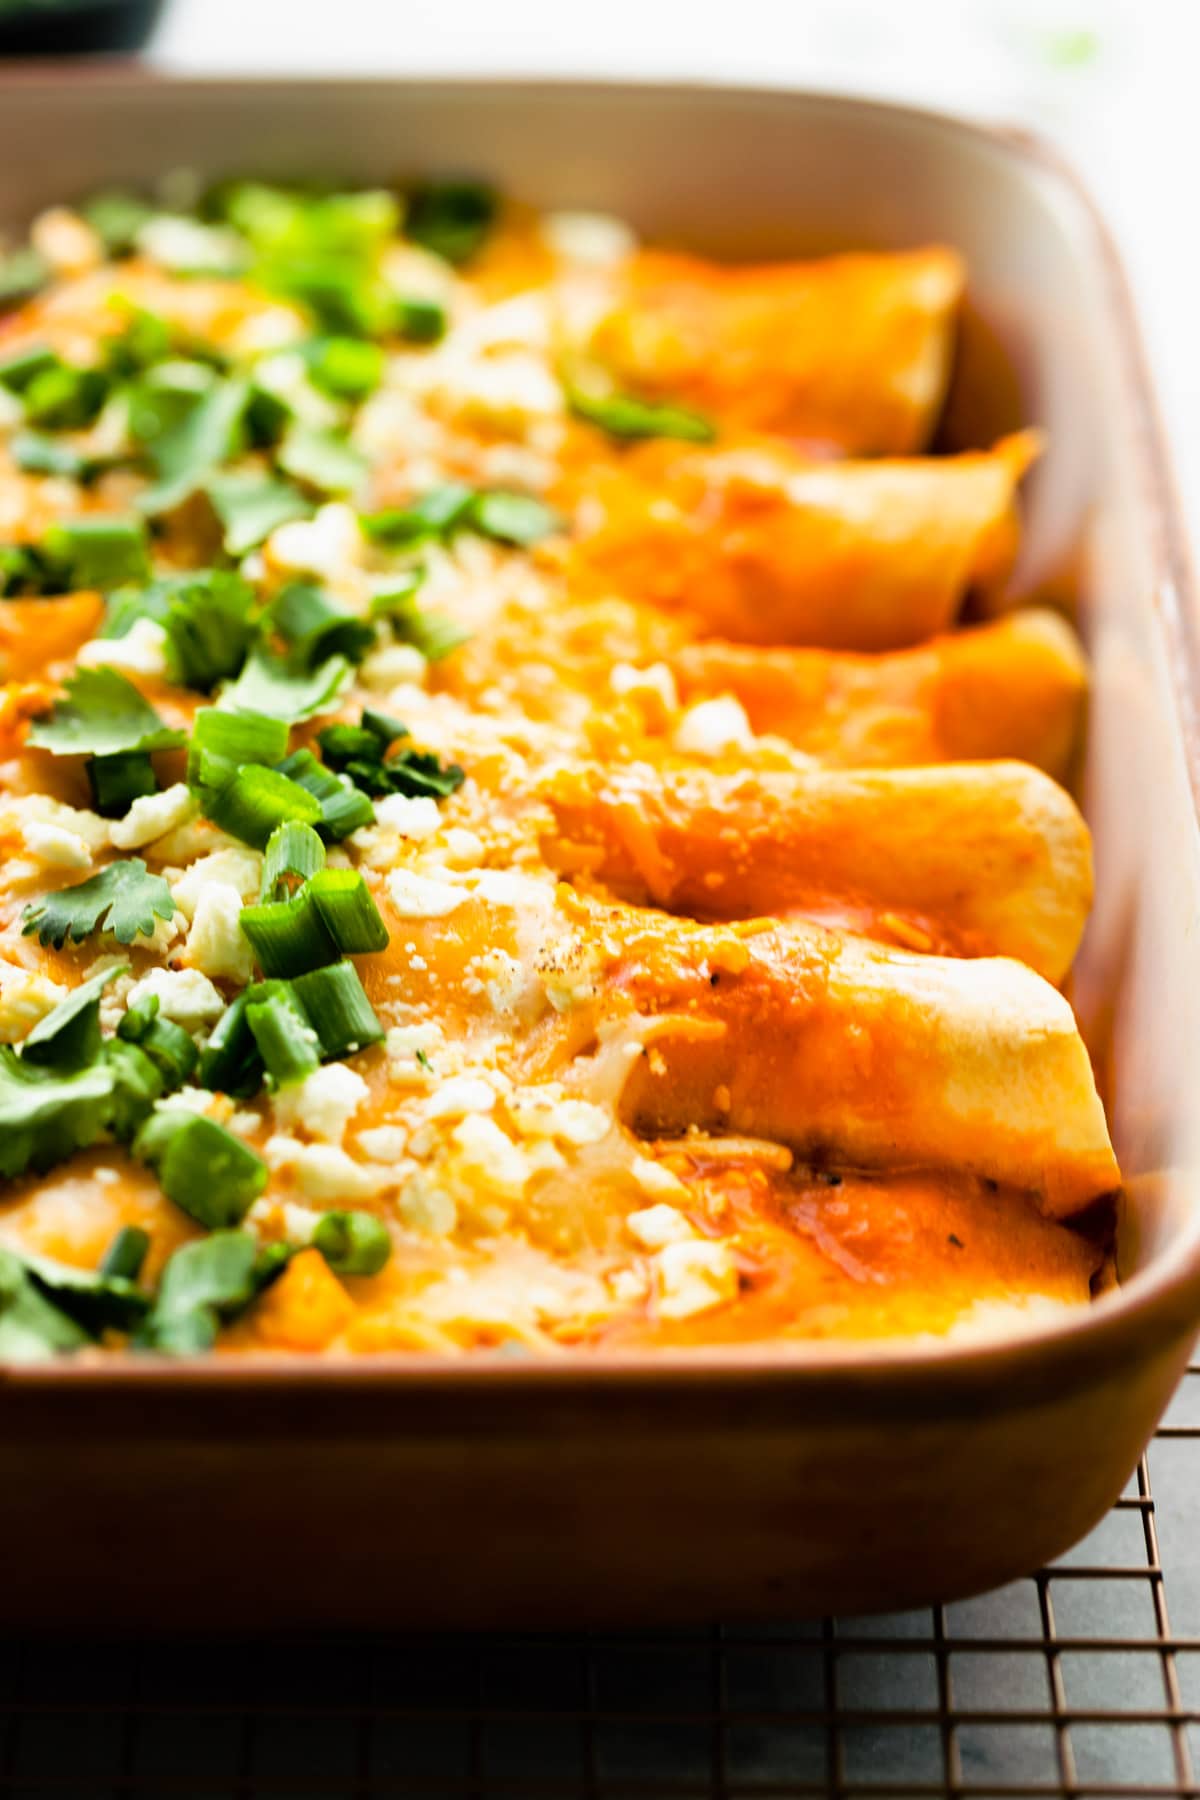 Make this easy enchilada recipe with pantry staples! Enchiladas in casserole dish with cilantro